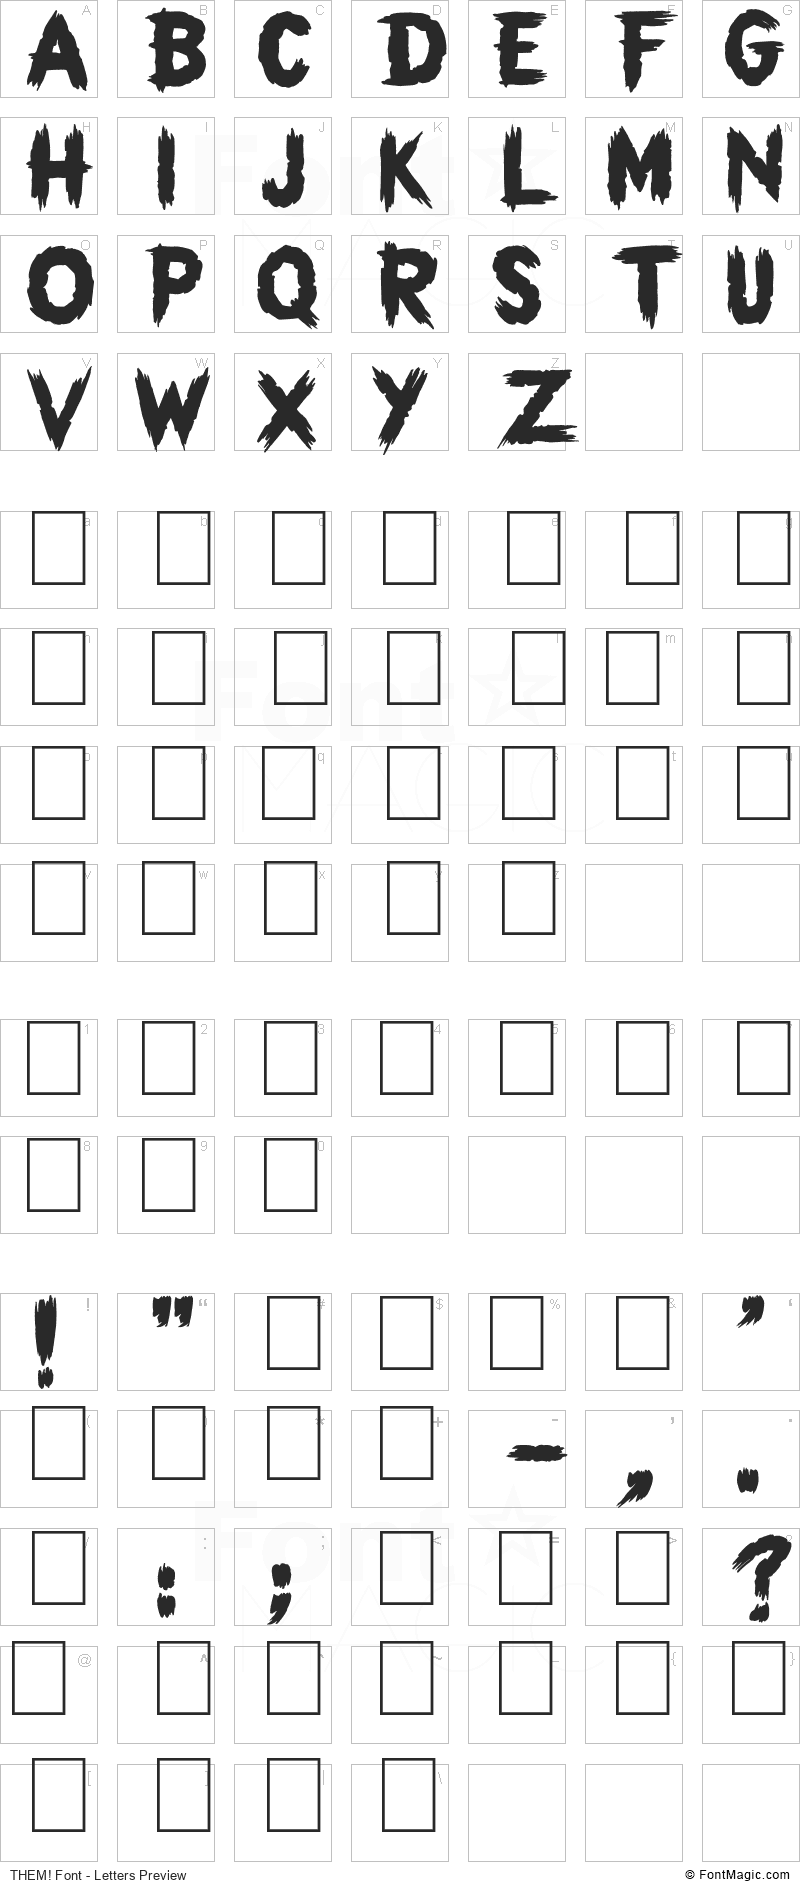 THEM! Font - All Latters Preview Chart